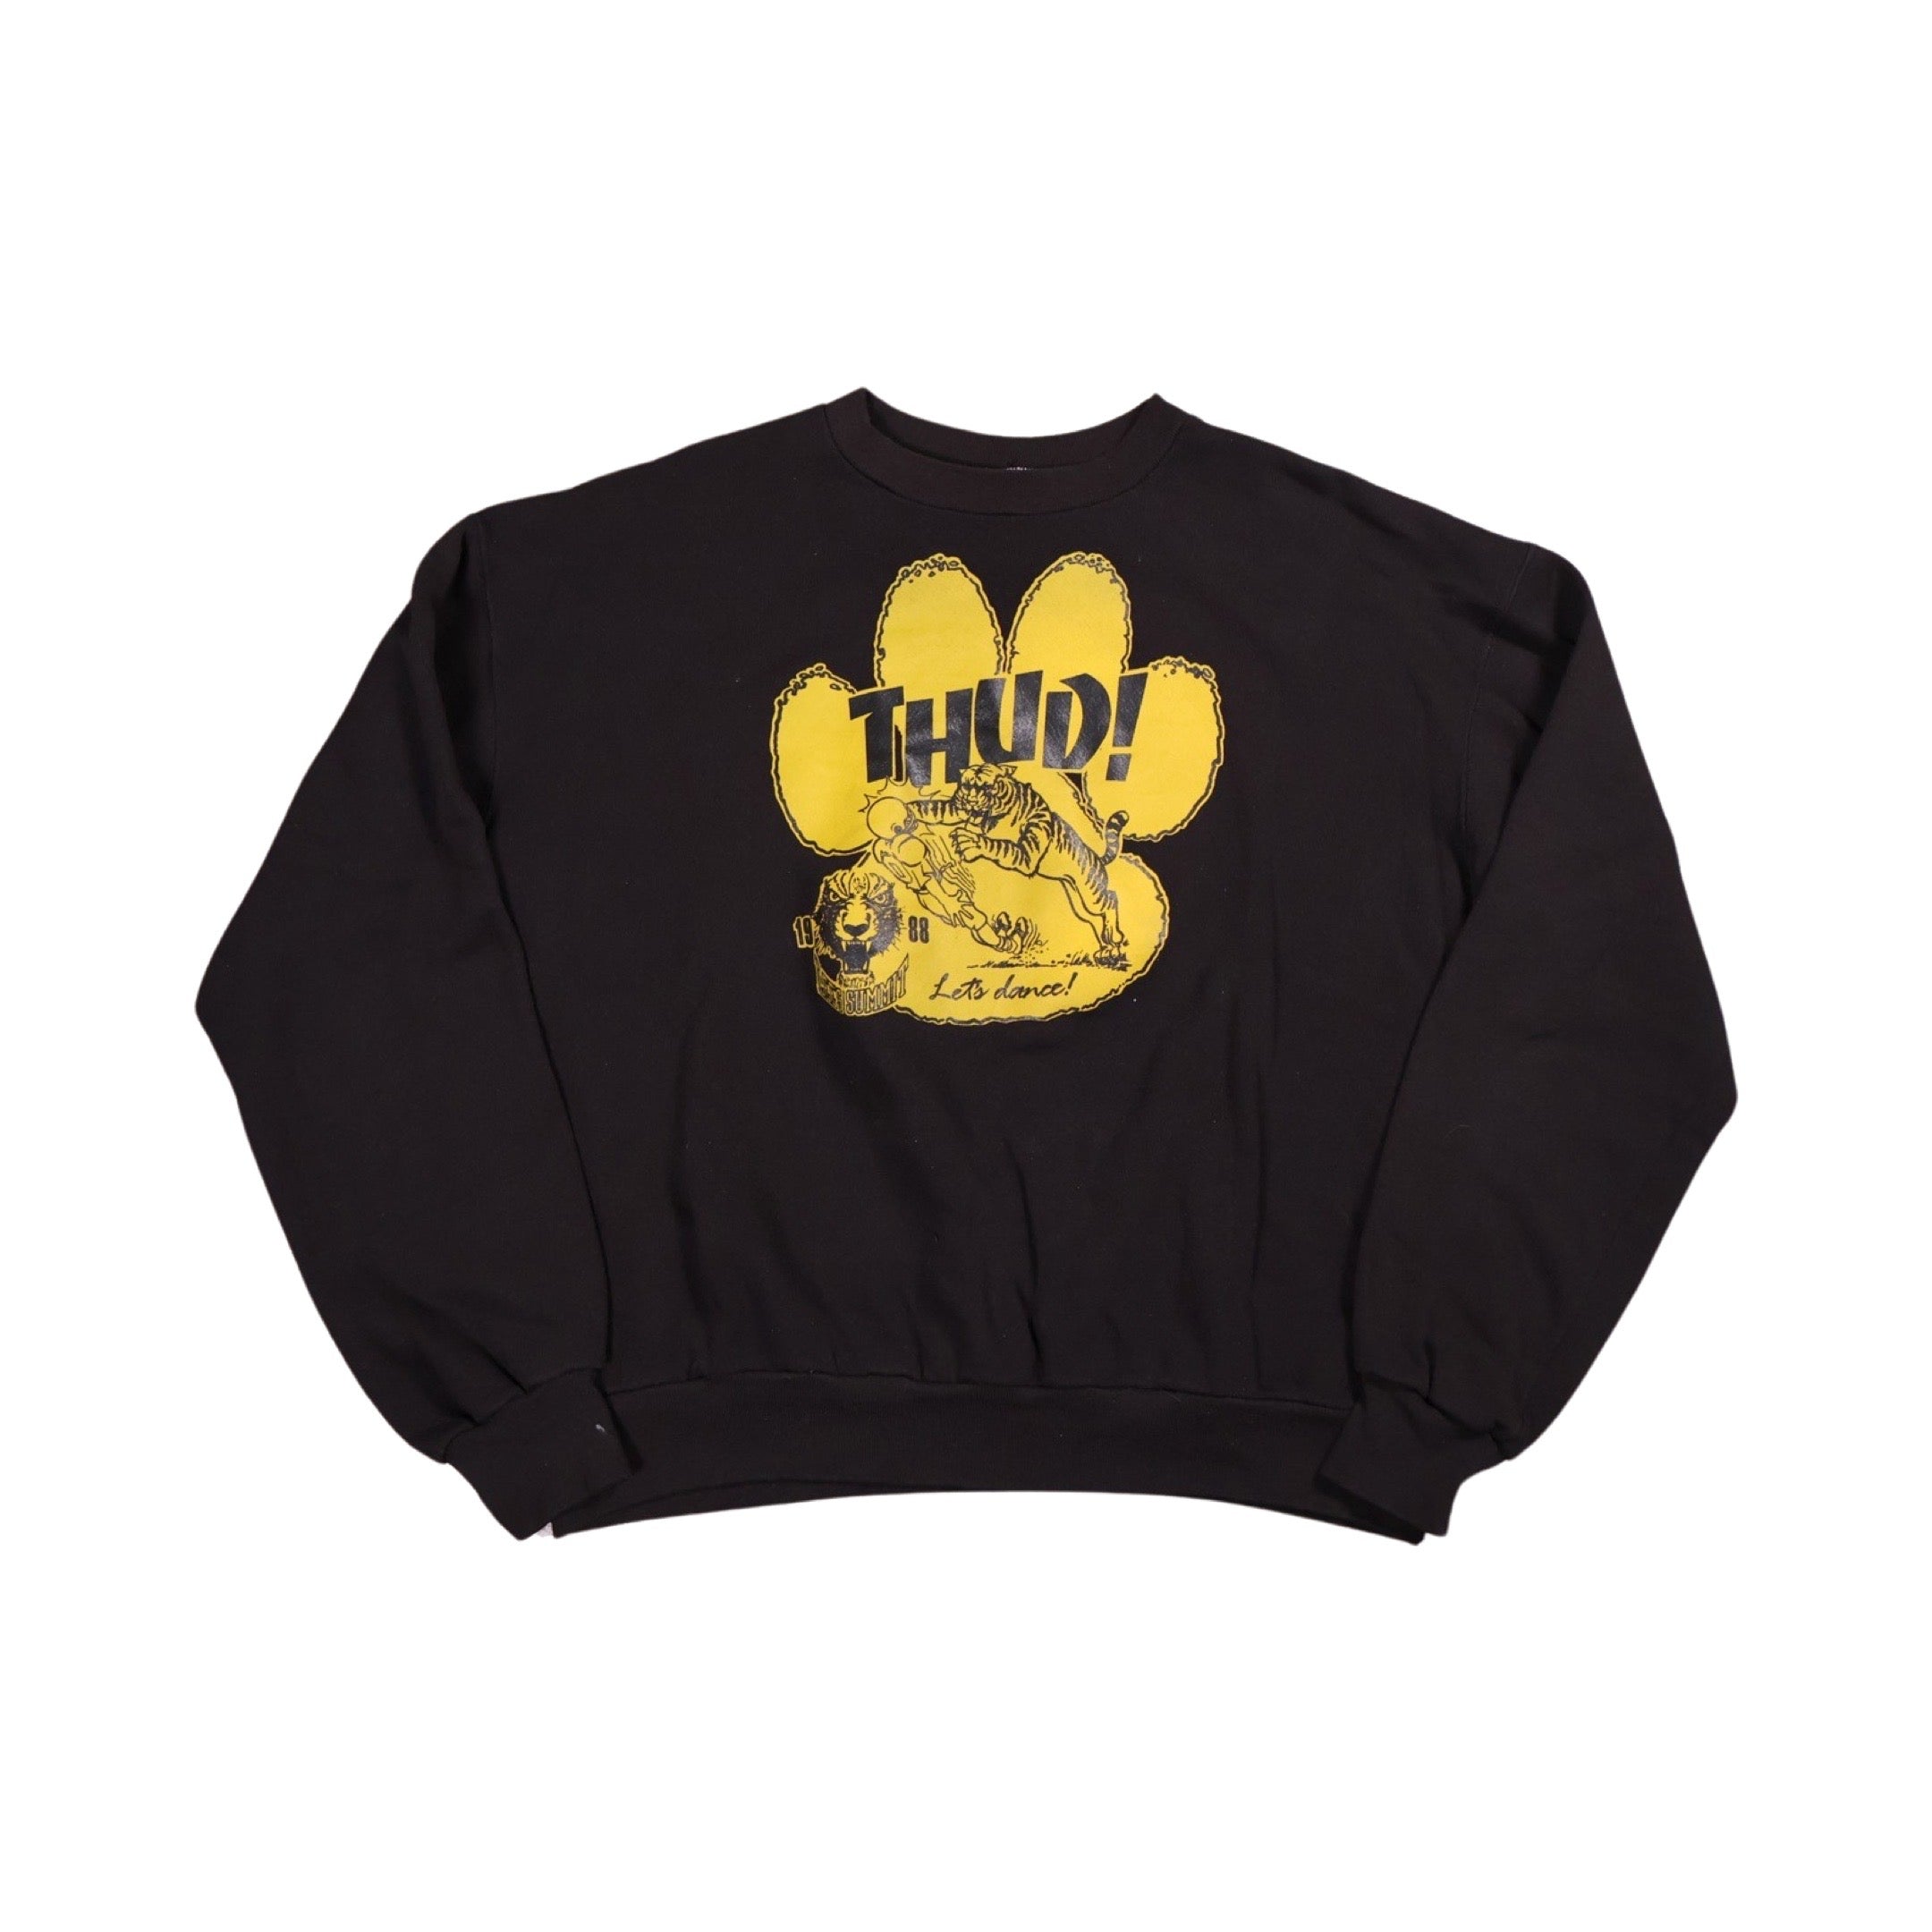 Tiger Football Thud! 1988 Sweater (Large)